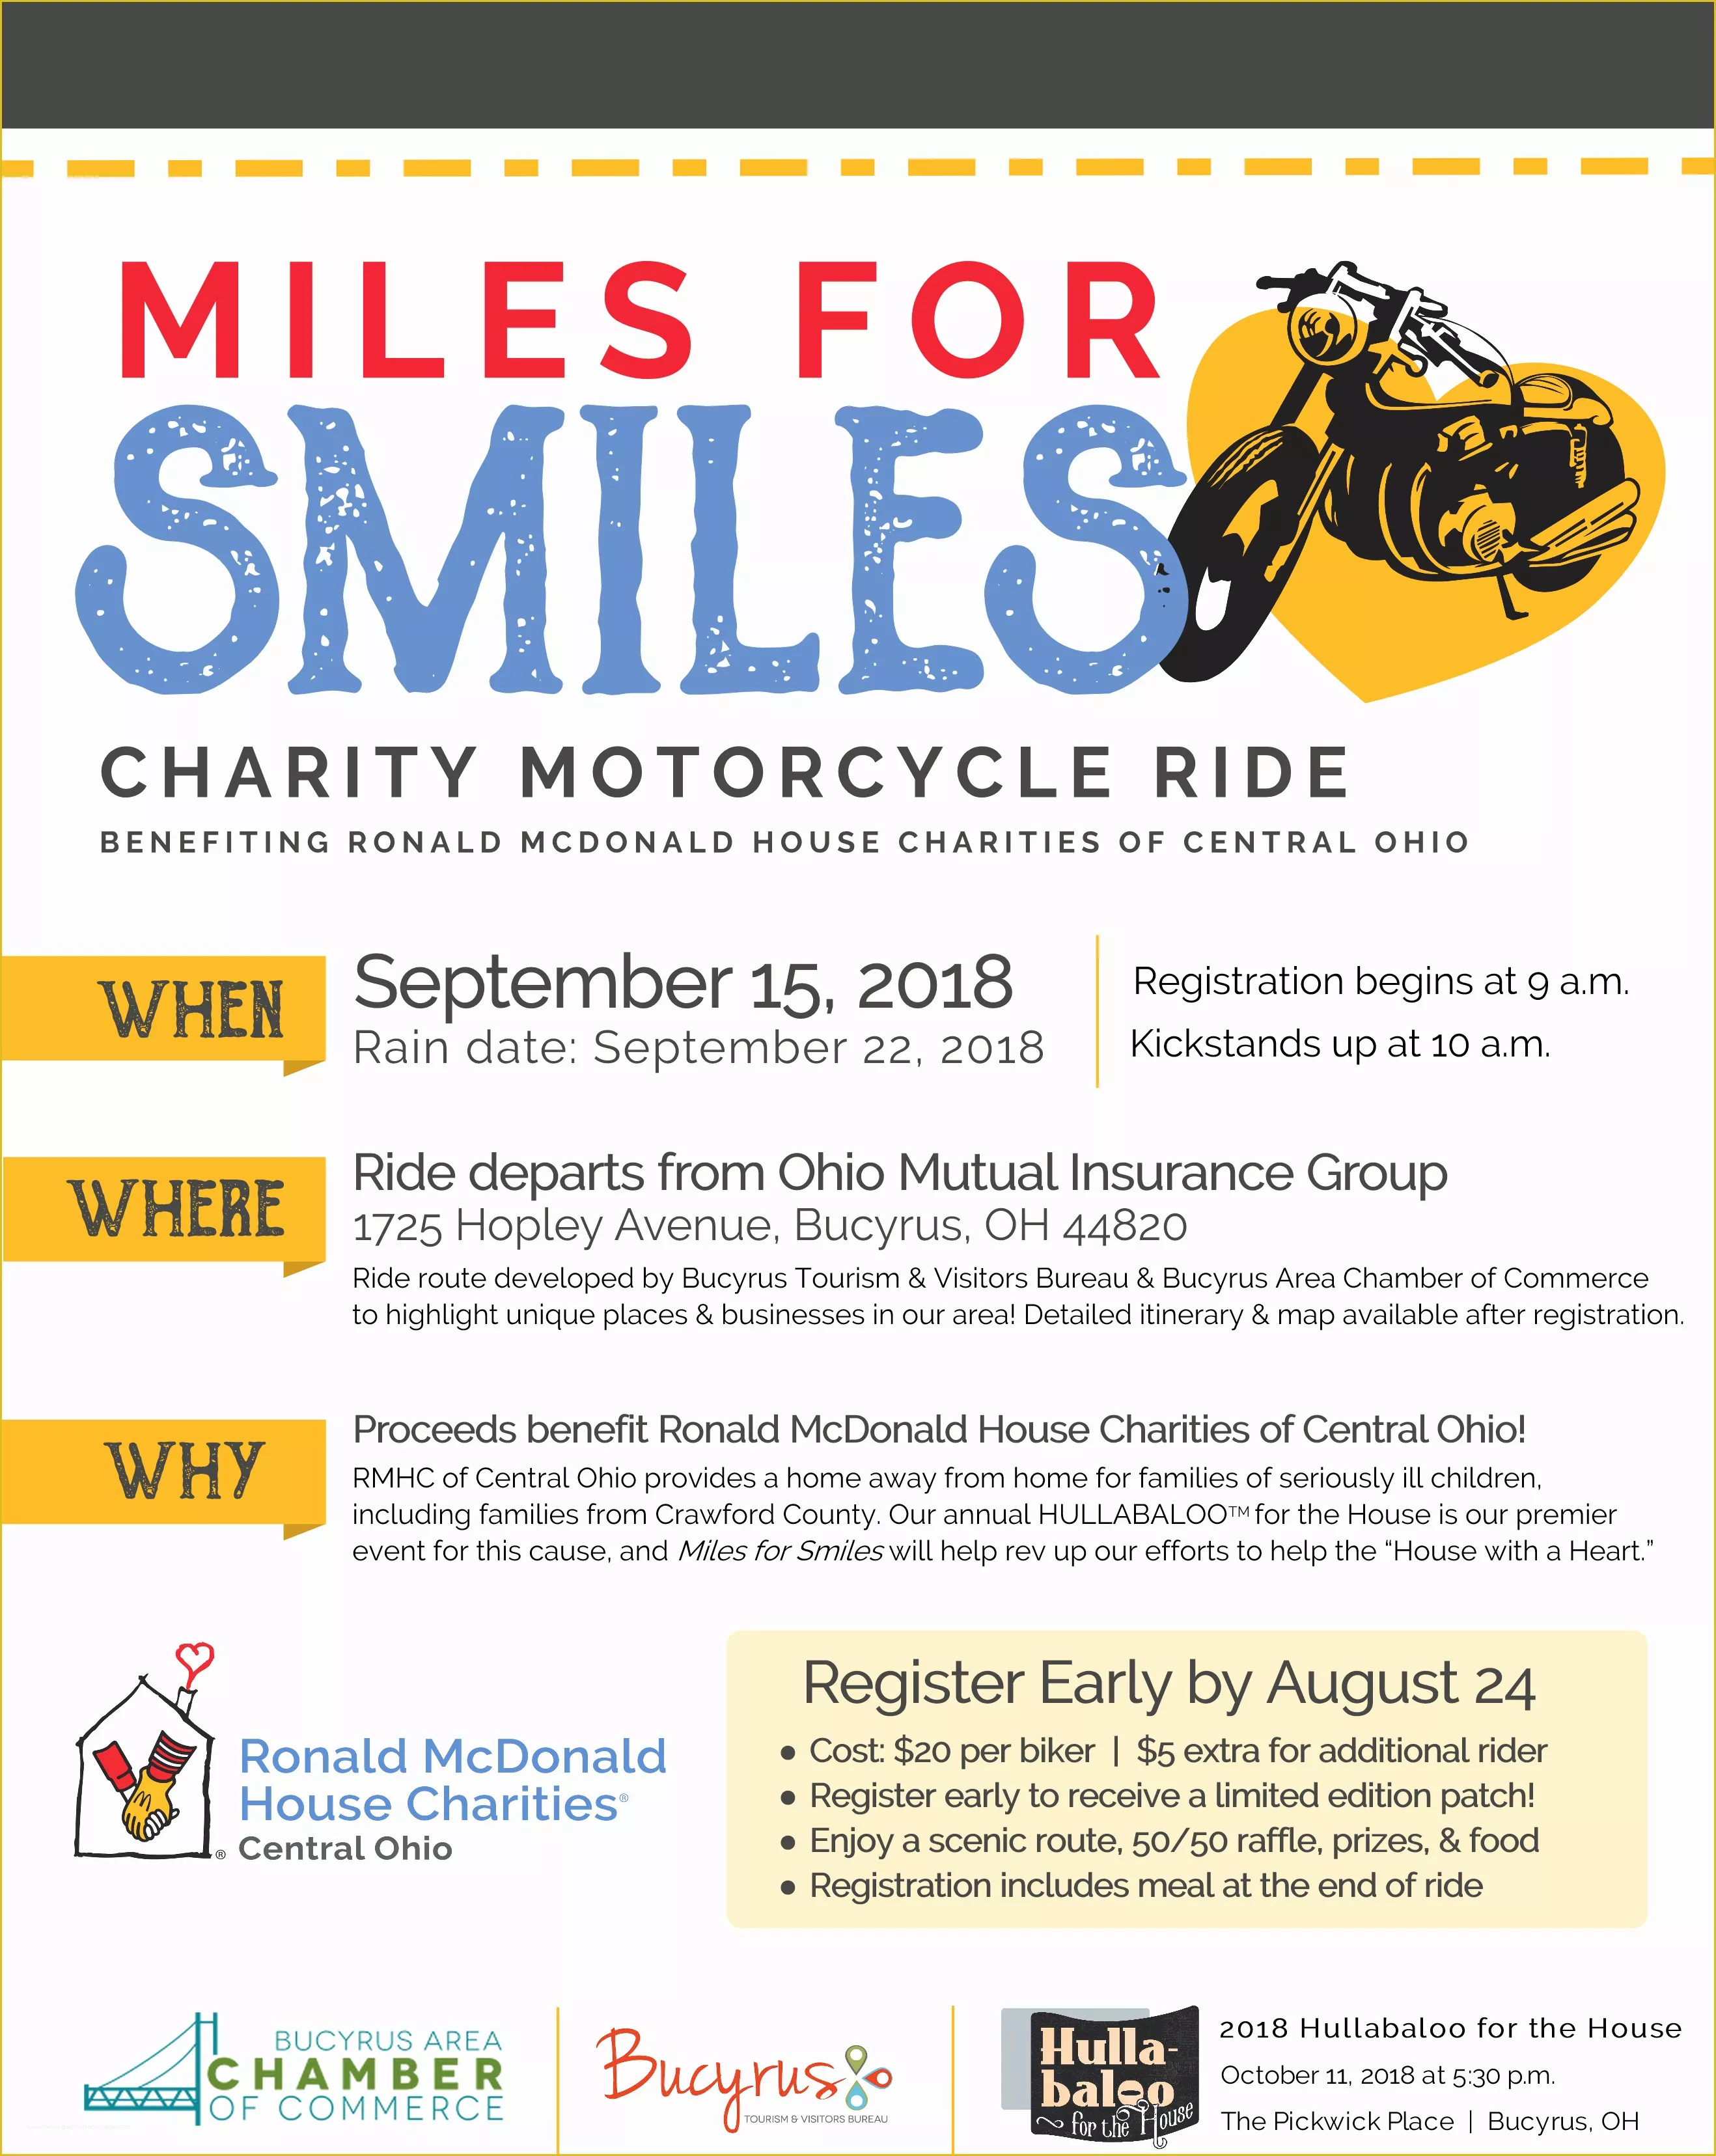 Free Motorcycle Ride Flyer Template Of Miles for Smiles Charity Motorcycle Ride – Bucyrus area